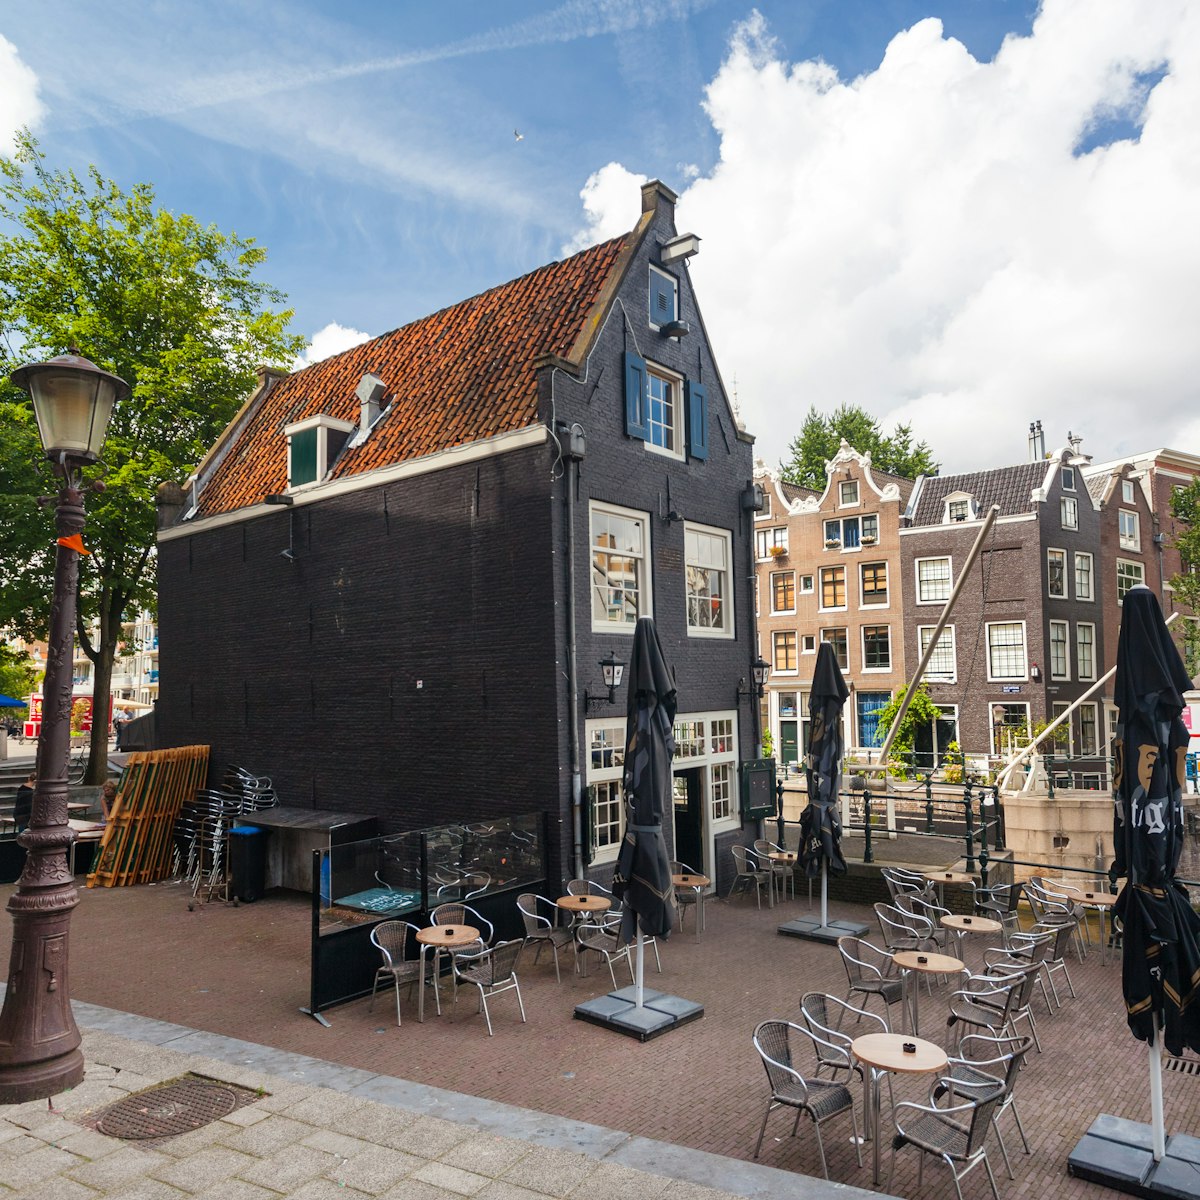 AMSTERDAM - NETHERLANDS: AUGUST 14, 2014: Cafe de Sluyswacht. It is in the historical lockhouse and is dating from 1695 in the Jodenbreestraat.; Shutterstock ID 222122779; Your name (First / Last): Josh Vogel; Project no. or GL code: 56530; Network activity no. or Cost Centre: Online-Design; Product or Project: 65050/7529/Josh Vogel/LP.com Destination Galleries